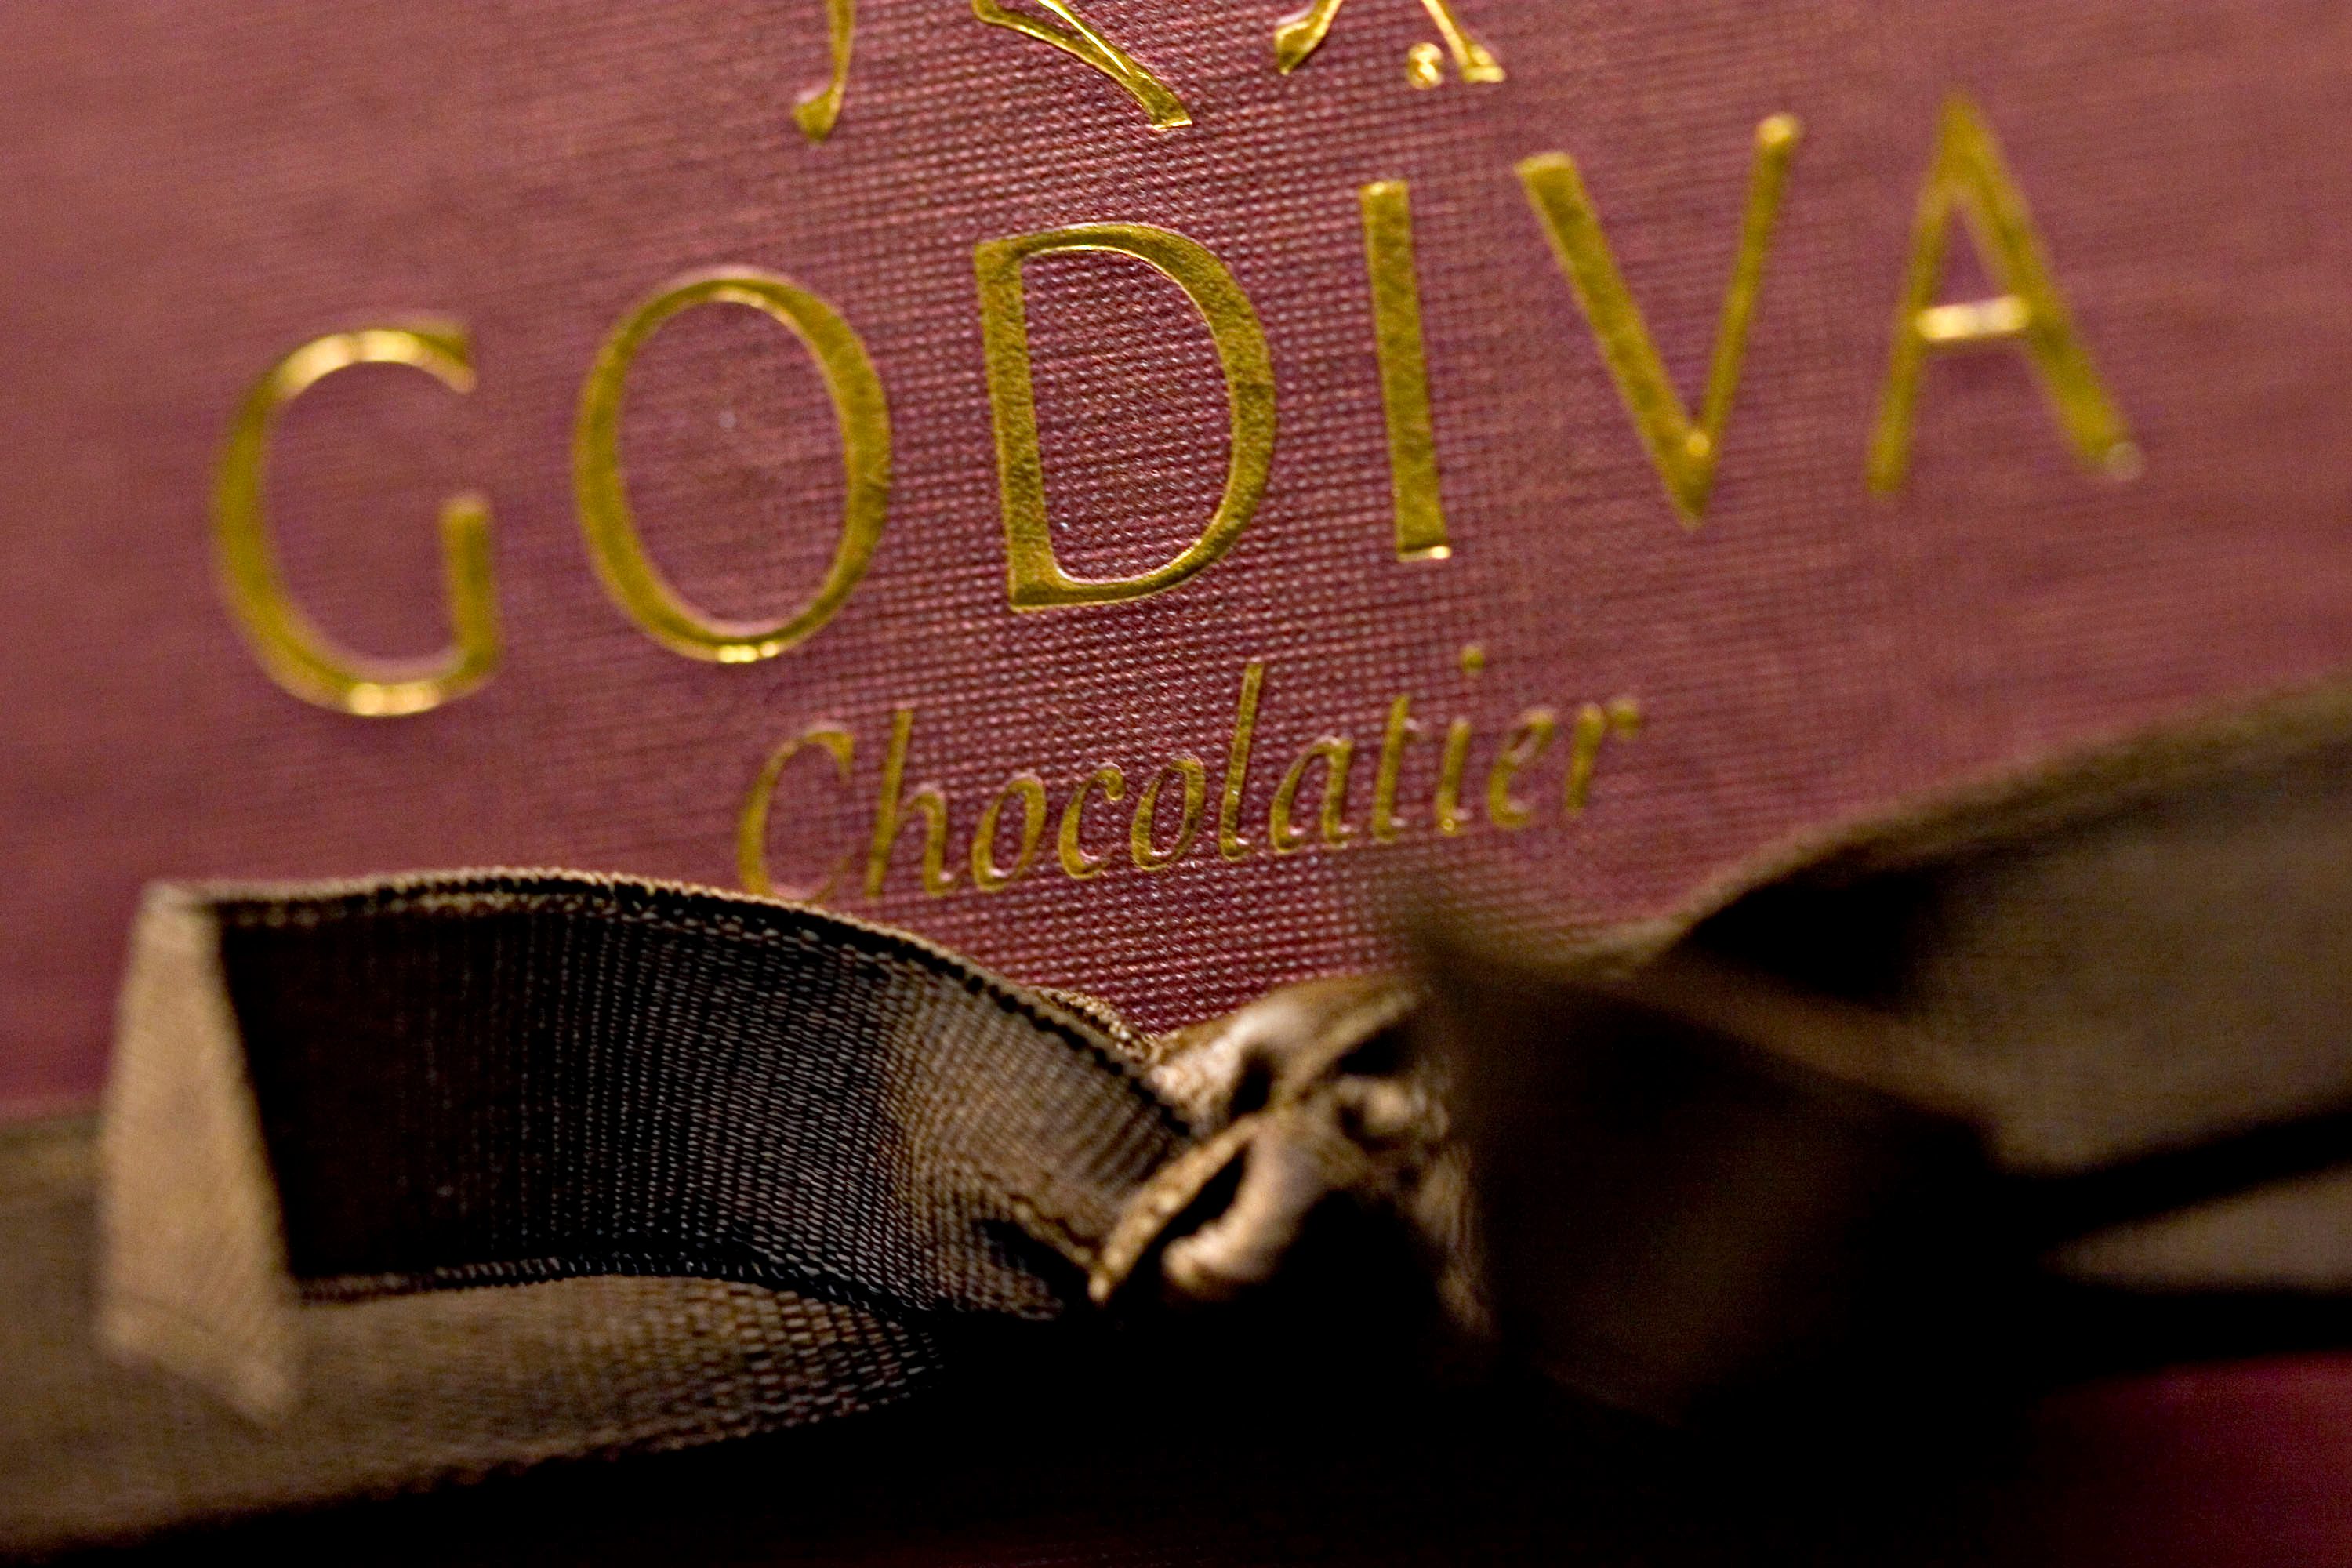 Godiva agrees to sell Asia-Pacific operations to MBK Partners